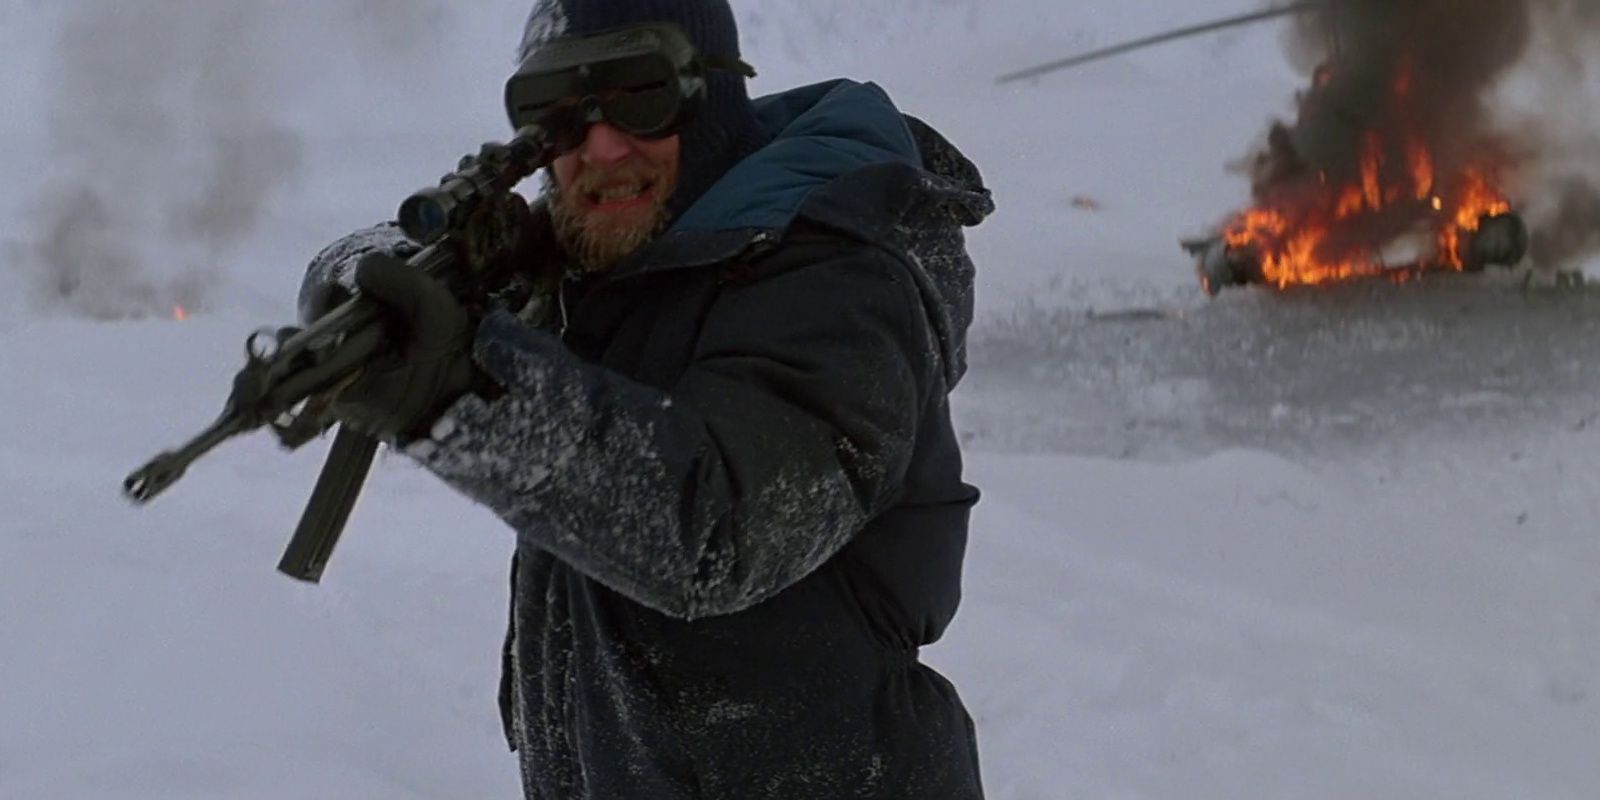 The Norwegian aims his rifle at the dog in The Thing